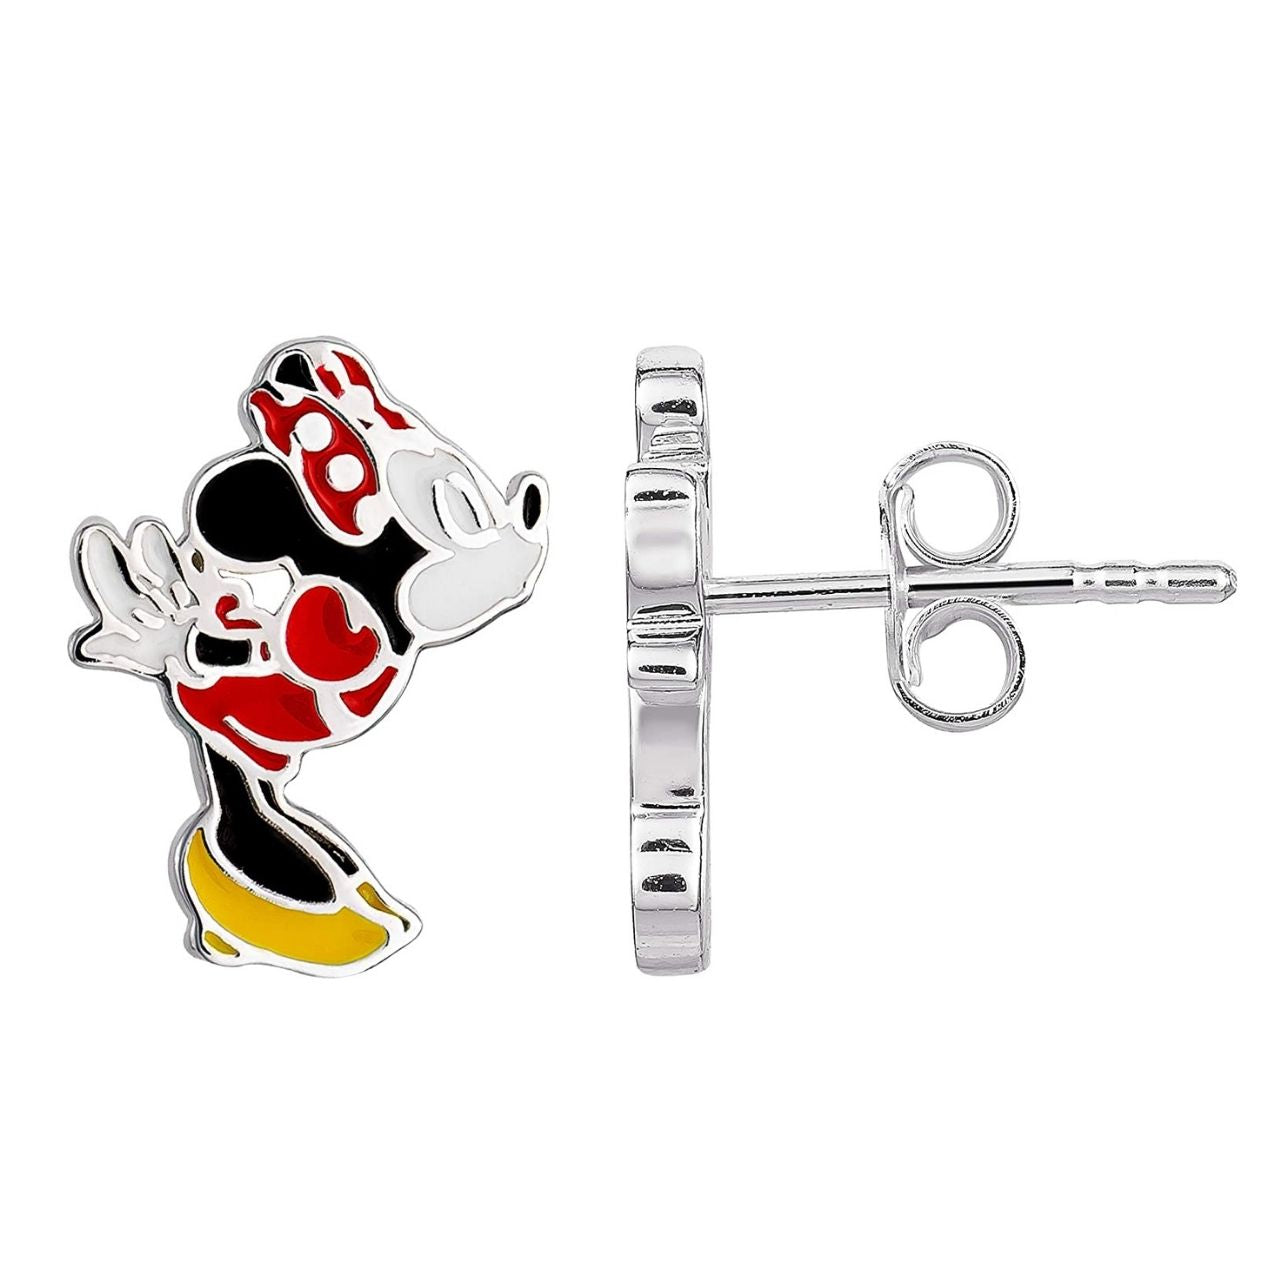 Peers Hardy Disney Mickey and Minnie Mouse Mismatched Stud Earrings  This classic adorable pair has a unique mismatched quality of Mickey and Minnie Mouse Kissing, one in Mickeys shape one in Minnies shape leaning into a kiss and giving a playful twist to this classic accessory.  Trendy and fashionable design, the Disney Mickey & Minnie Mouse kissing famous pose Sterling Silver Stud Earrings add a chic, fun touch to any outfit.